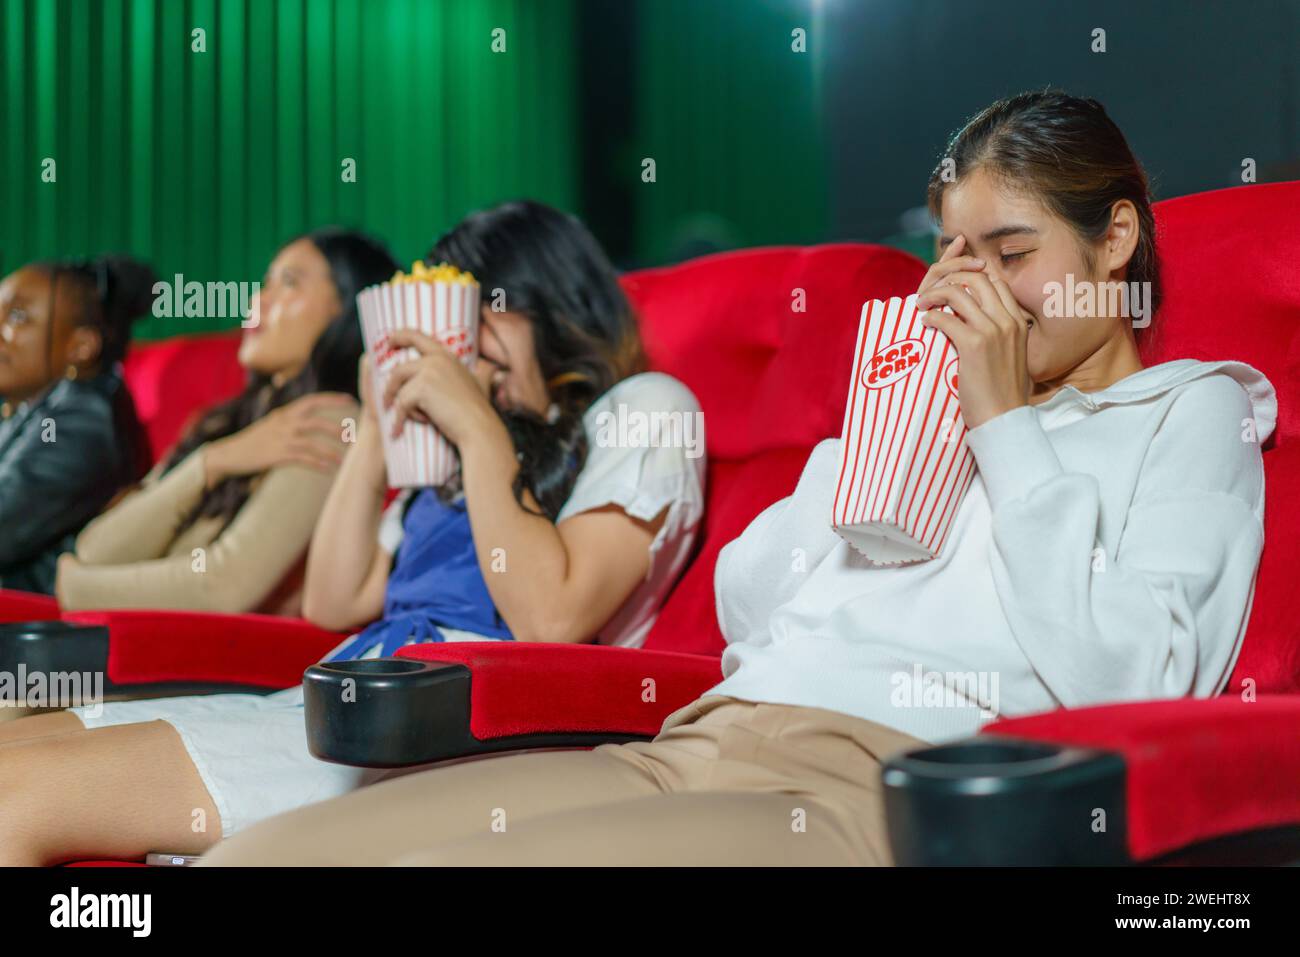 Individuals react to a horror movie on the big screen. This candid moment captures the thrill and fright of the cinematic experience Stock Photo